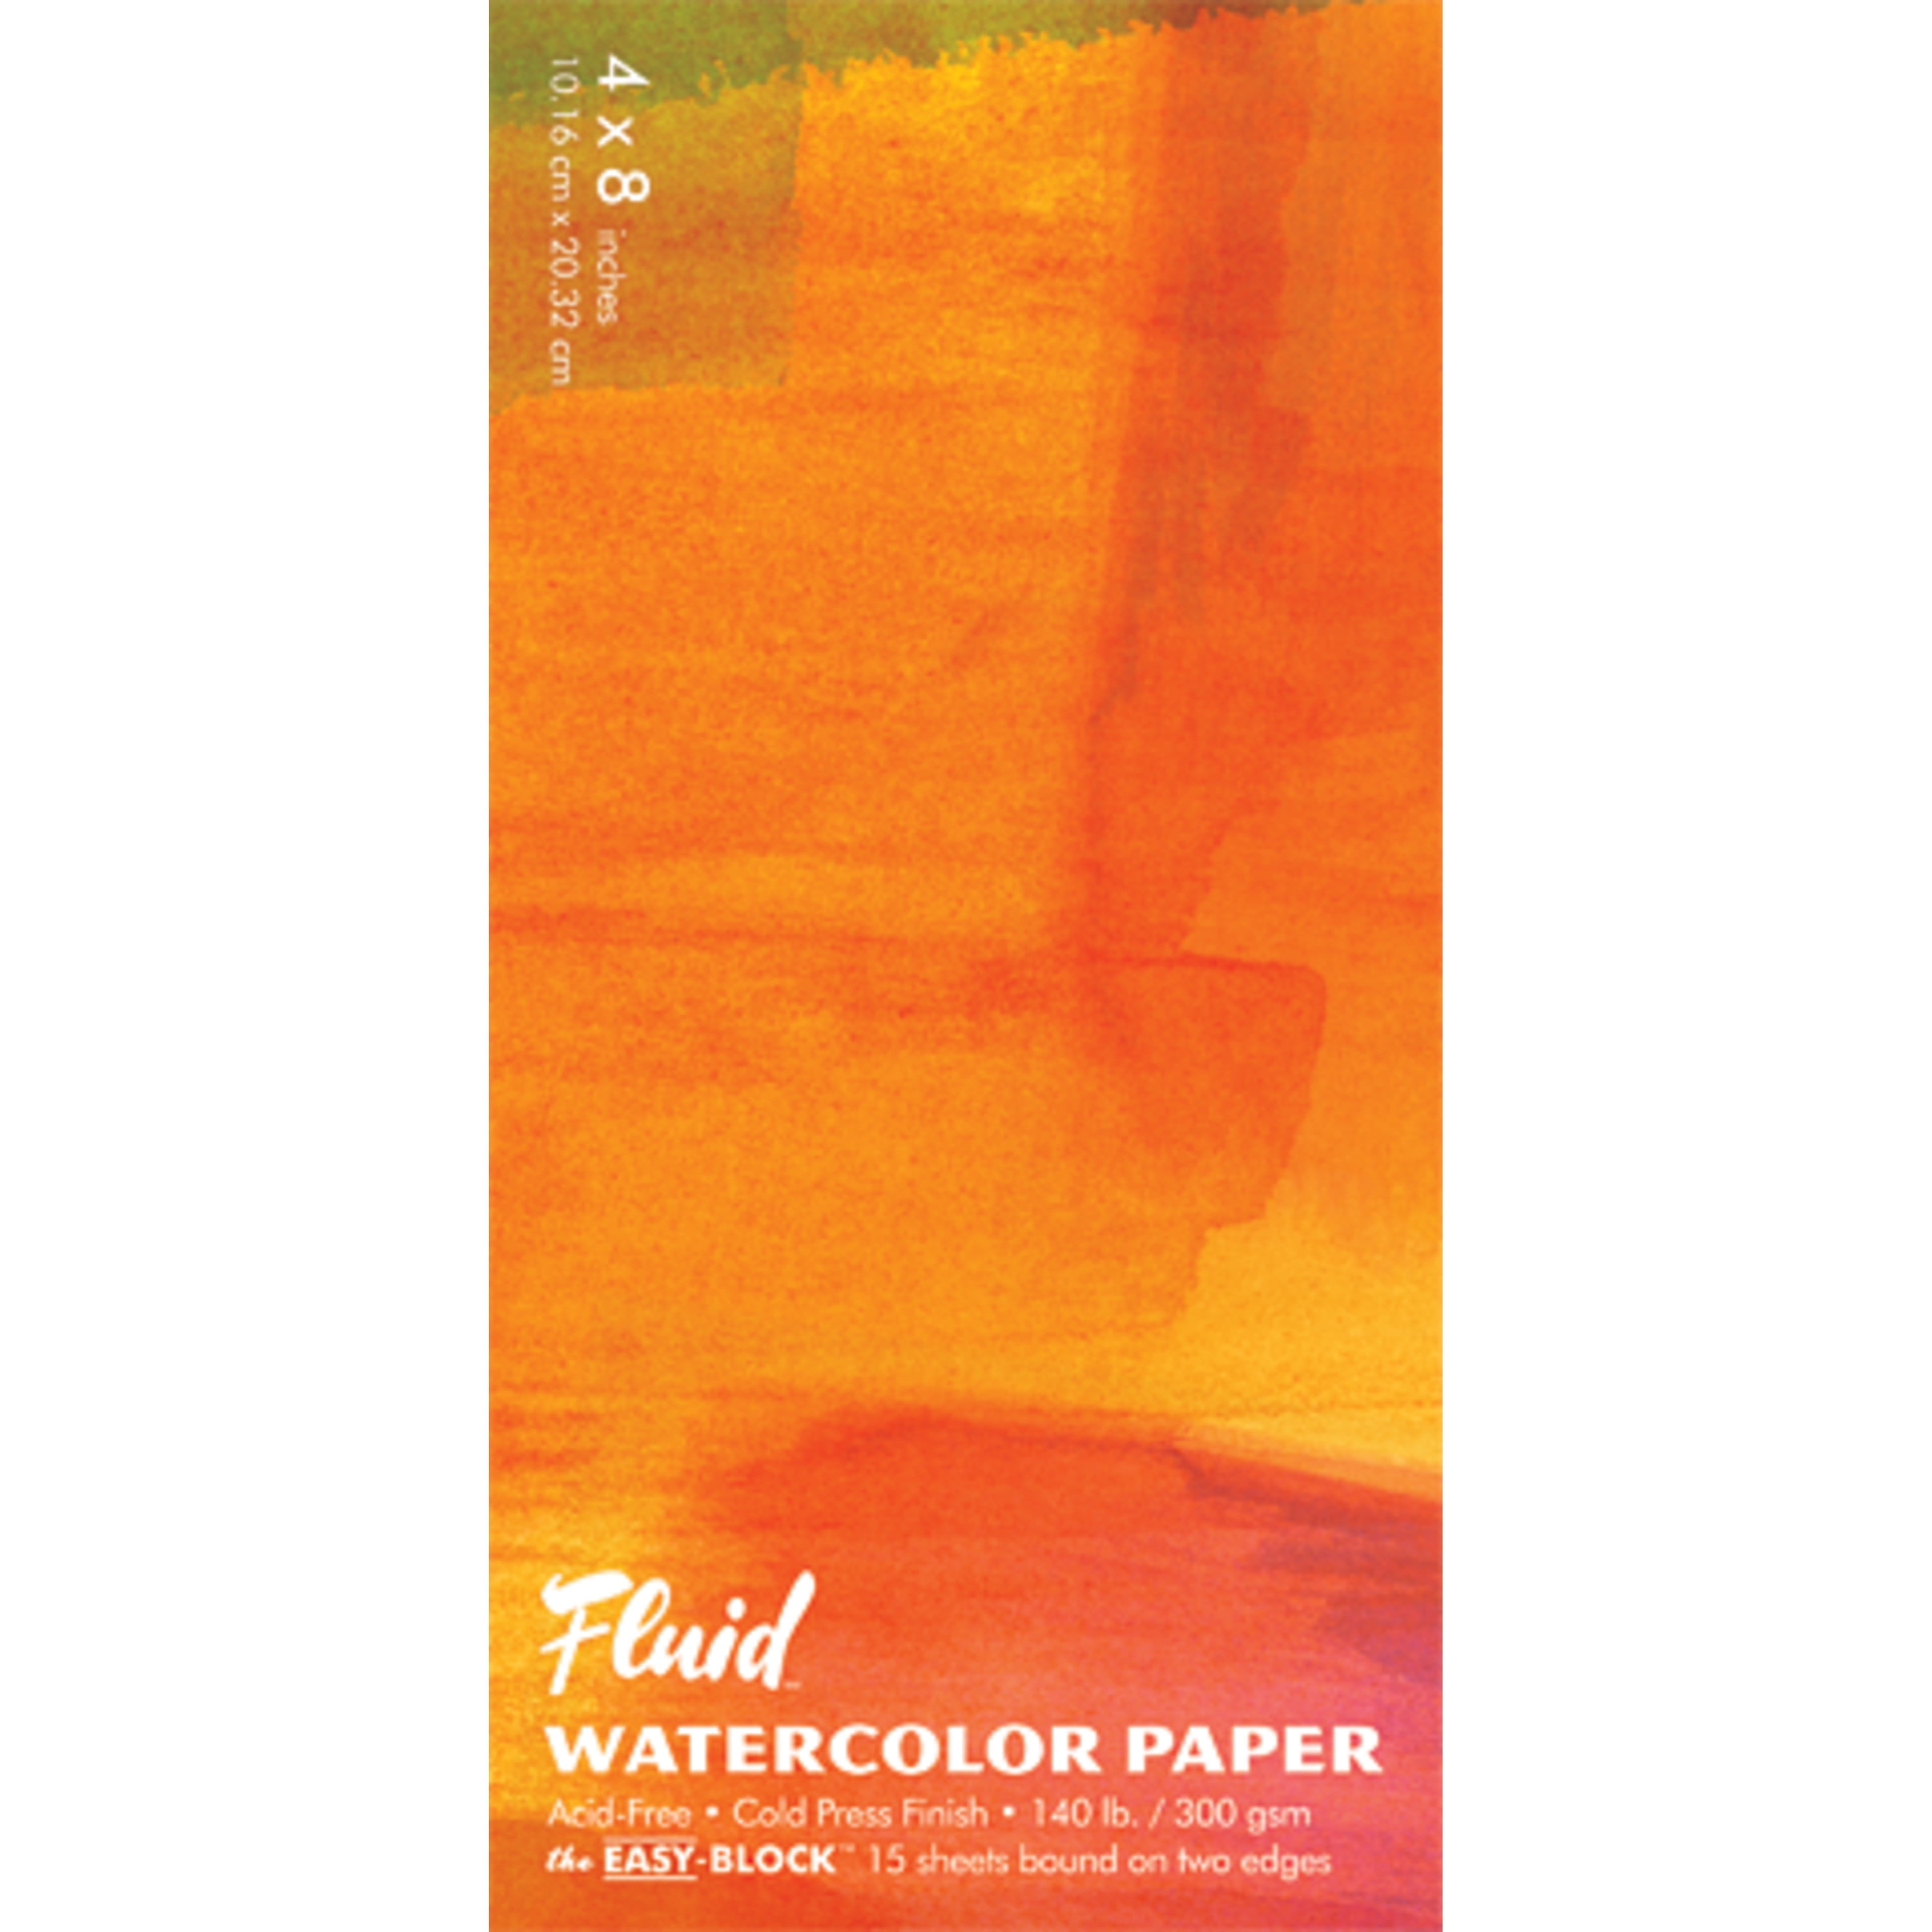 Academy Grade Watercolor Paper Texture Cold Press discount, GetQuotenow -  All About Art US – All About Art International, LLC